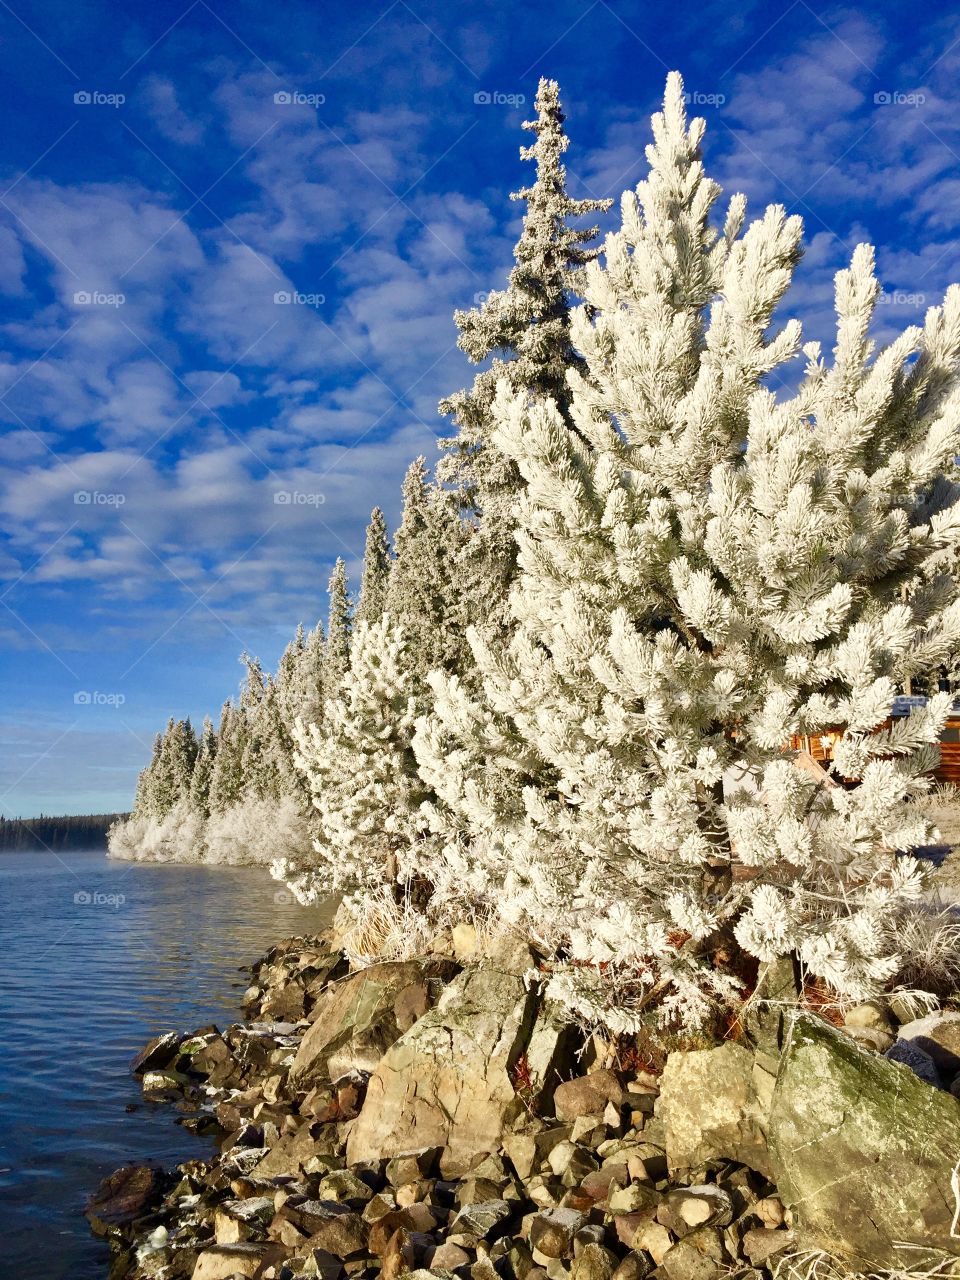 Hoar frost hits the lakeshore as temps drop below zero. Makes for a stunning scene in the wilderness. 